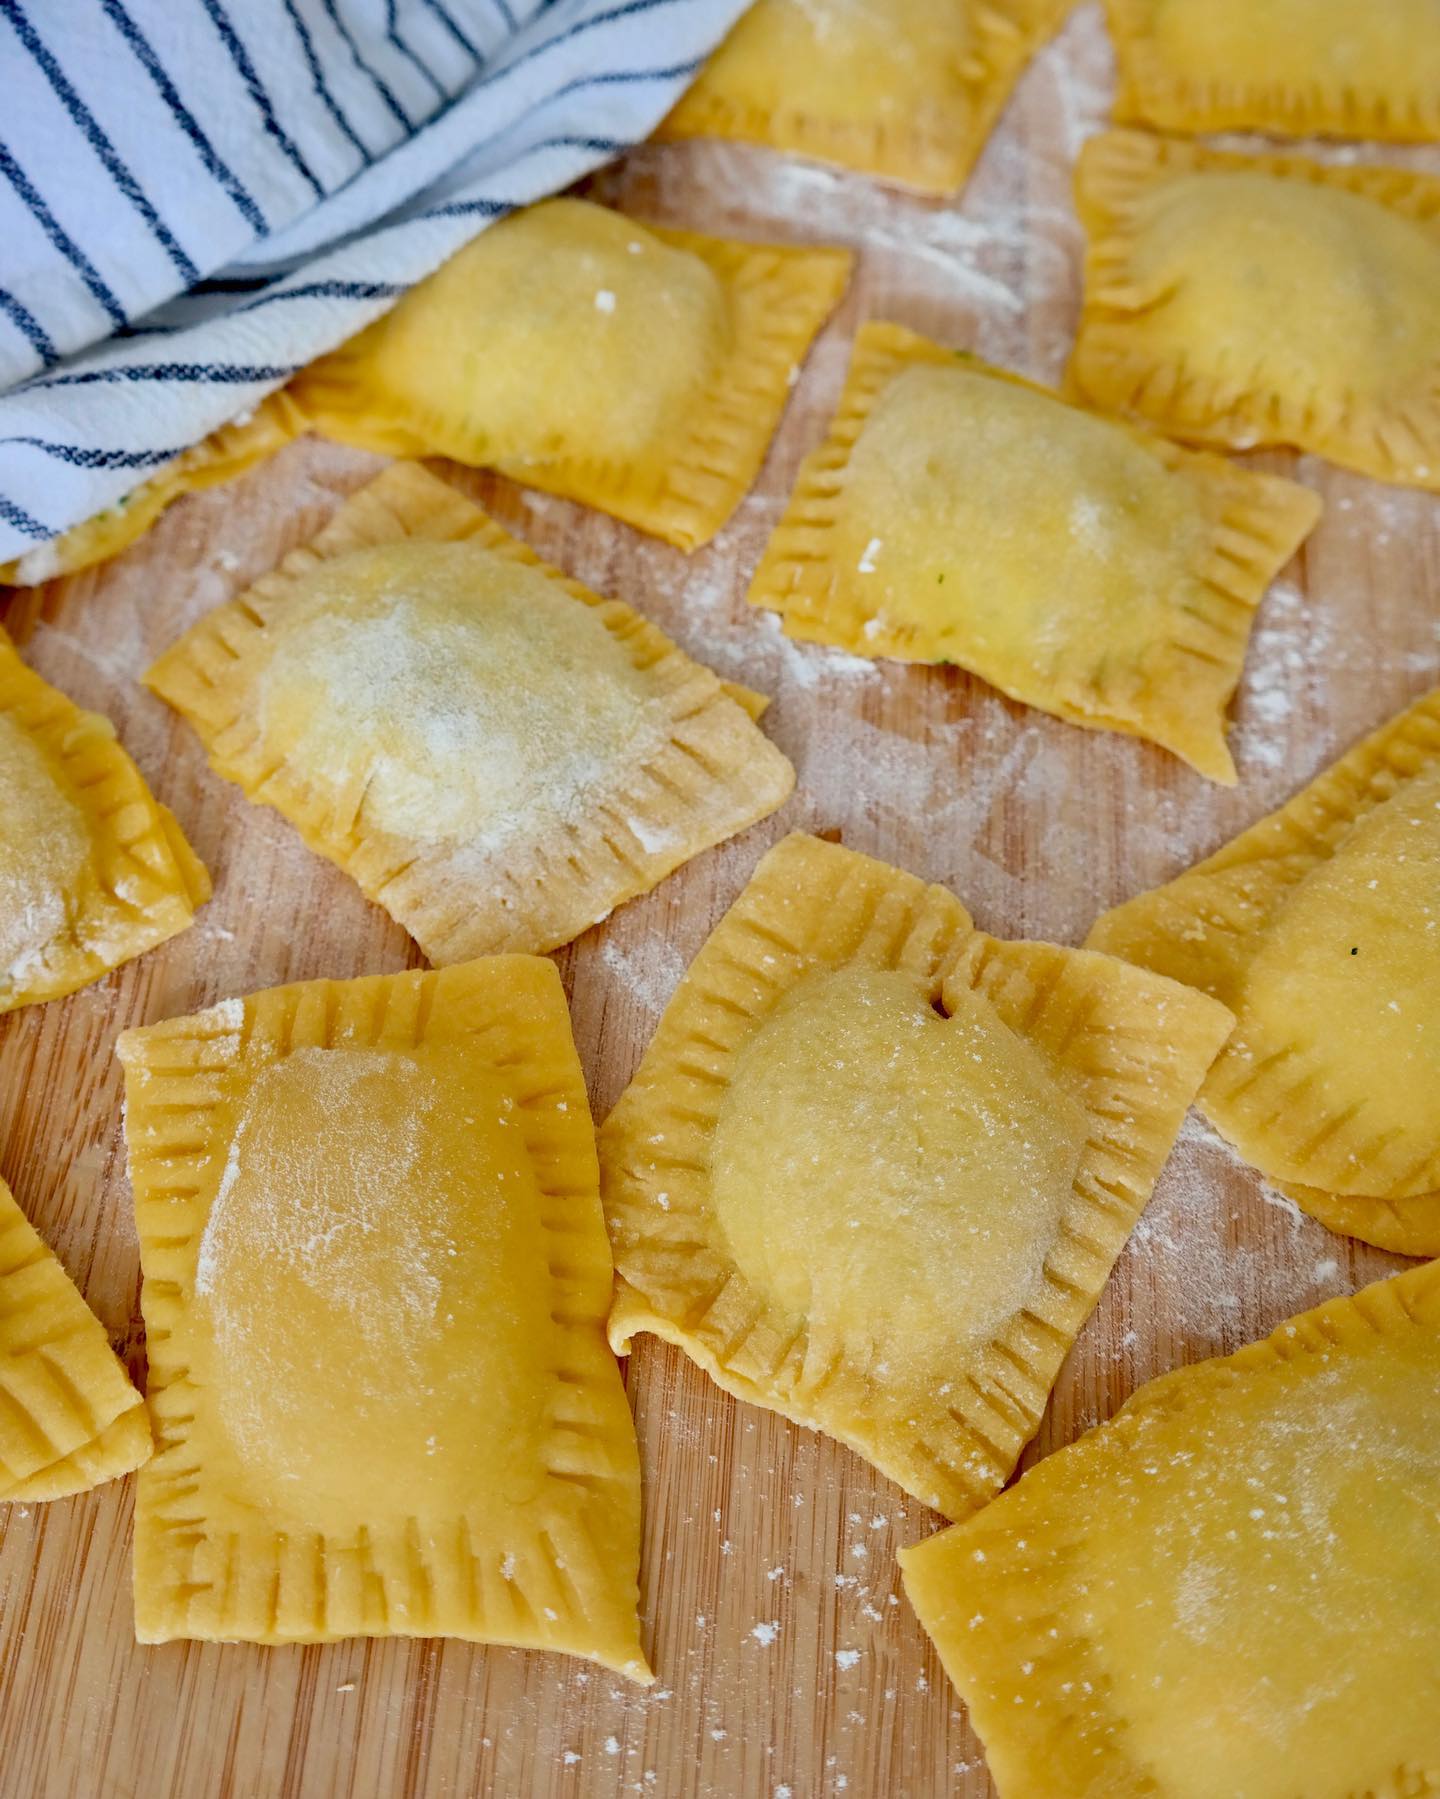 ✨New blog post✨
Homemade spinach and feta cheese ravioli 👩‍🍳

More photos and step by step recipe on my blog, link in profile 👆
.
.
.
.
#baking #bake #pasta #dough #ravioli #homemade #homebaking #homebaked #pastadoughmaking #bakerenthusiast #food #delicious #dinner #dinnerideas #recipe #blog #blogger #foodblogger